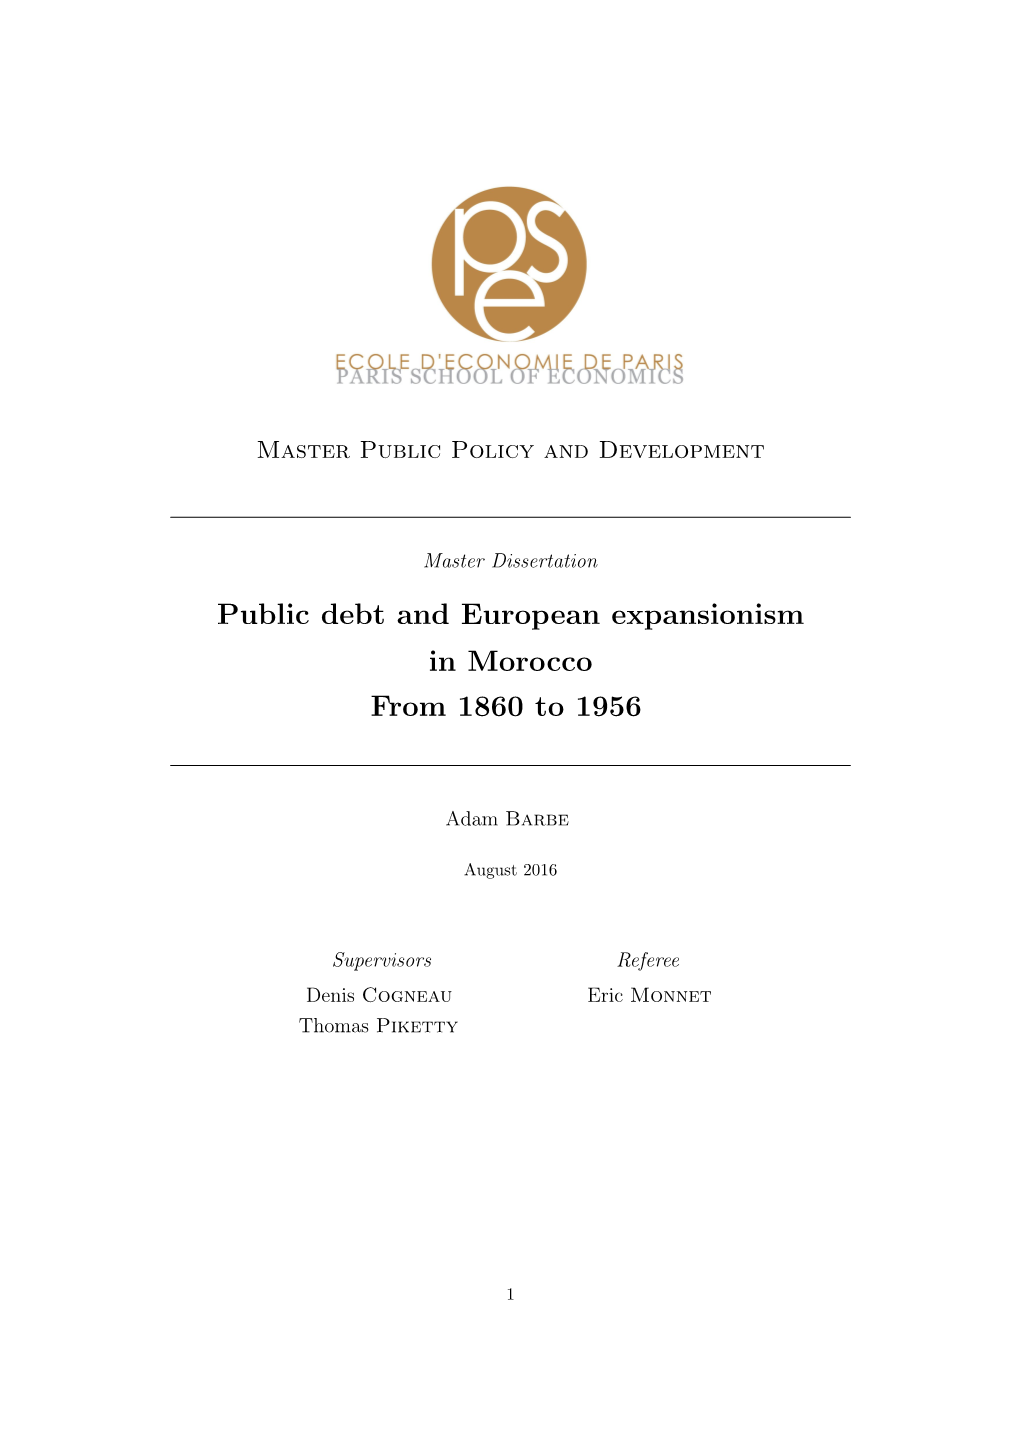 Public Debt and European Expansionism in Morocco from 1860 to 1956